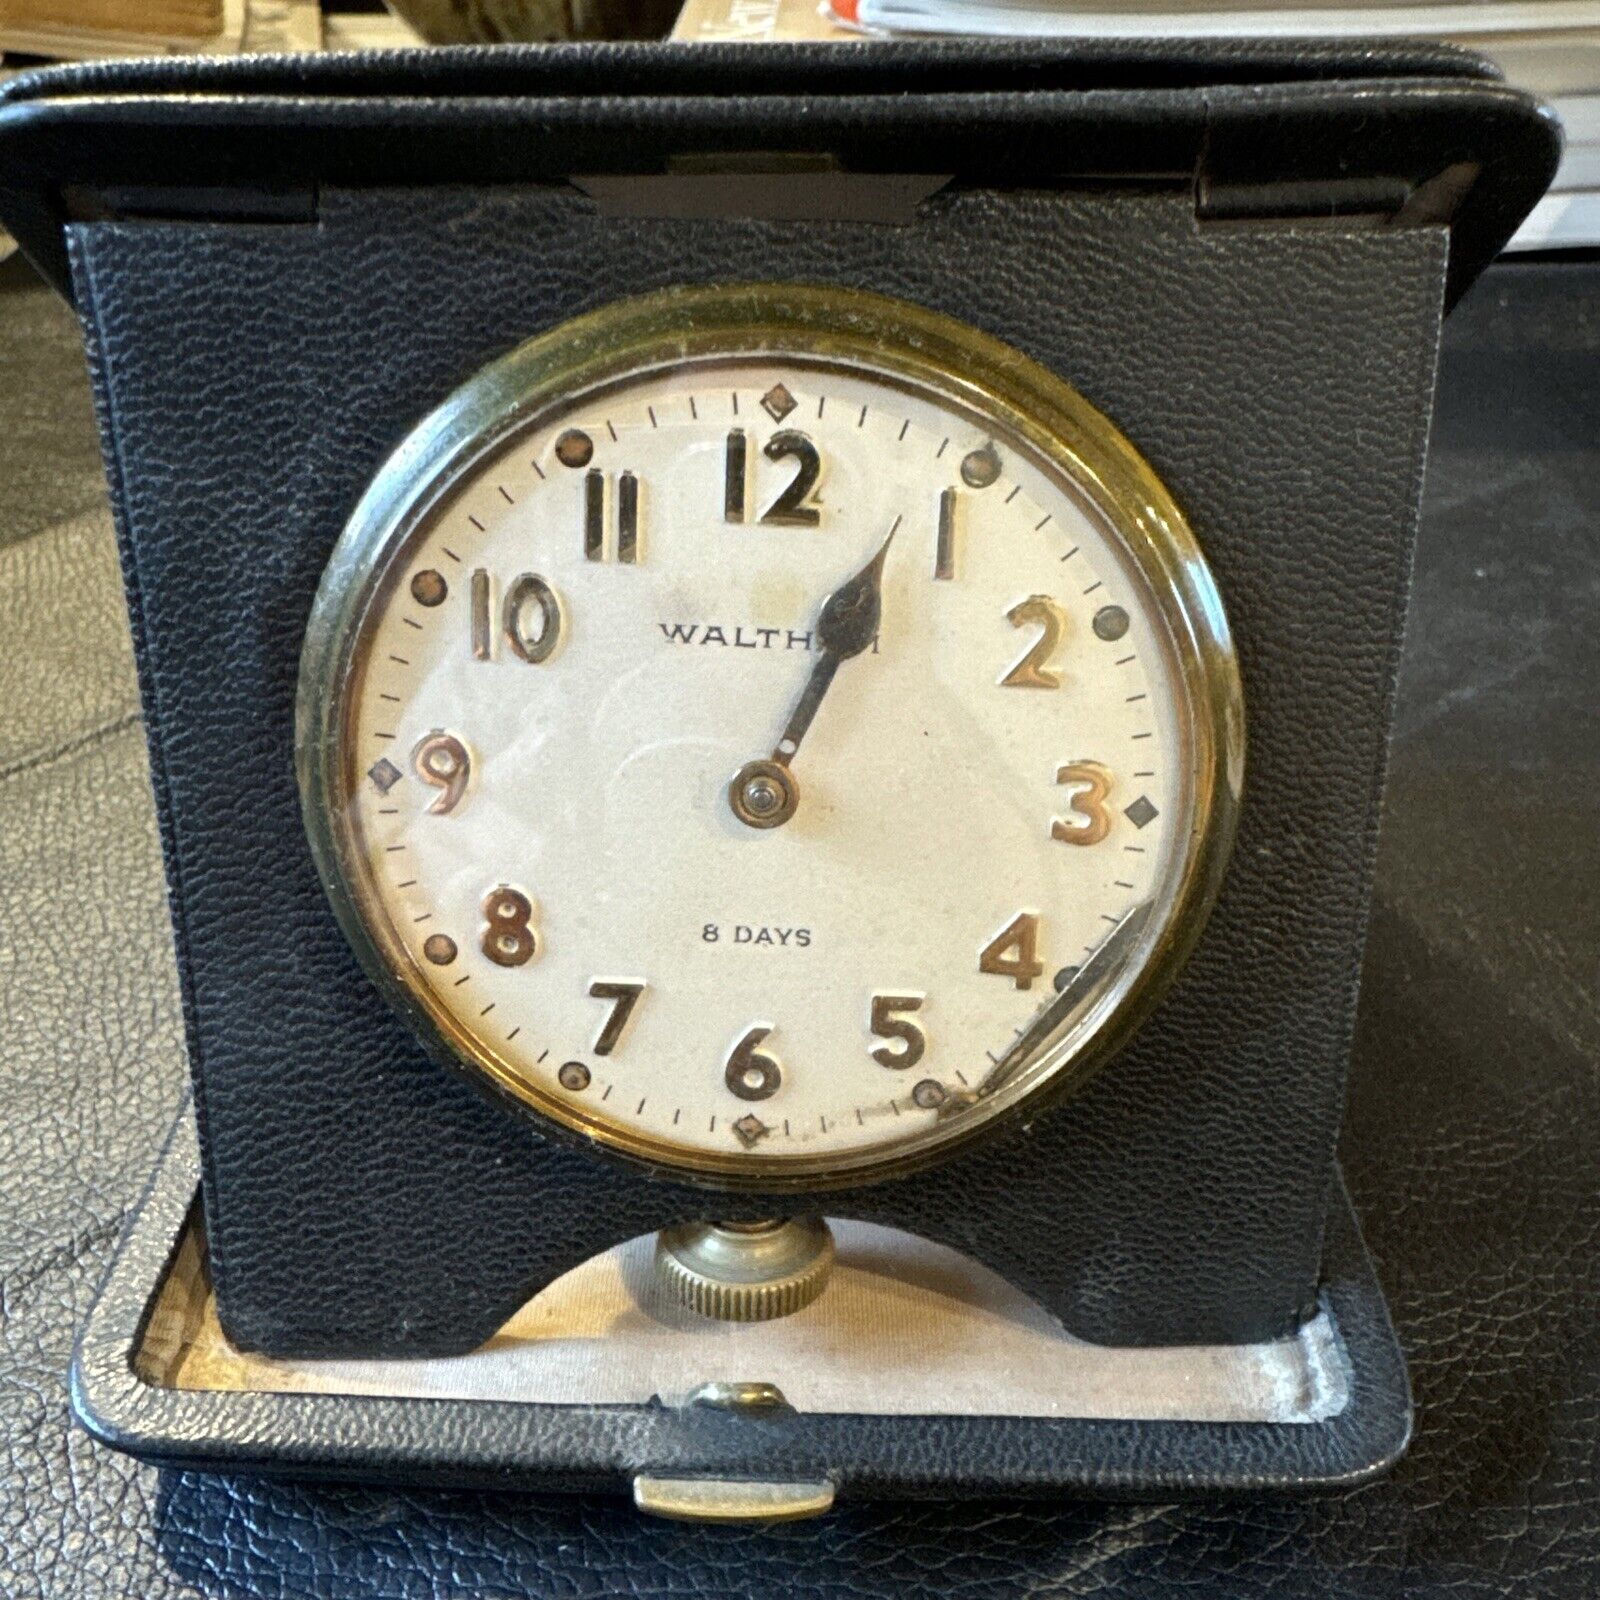 Antique 1926 WALTHAM 9J Mechanical Wind-Up 8 Day Travel Clock with Leather Case